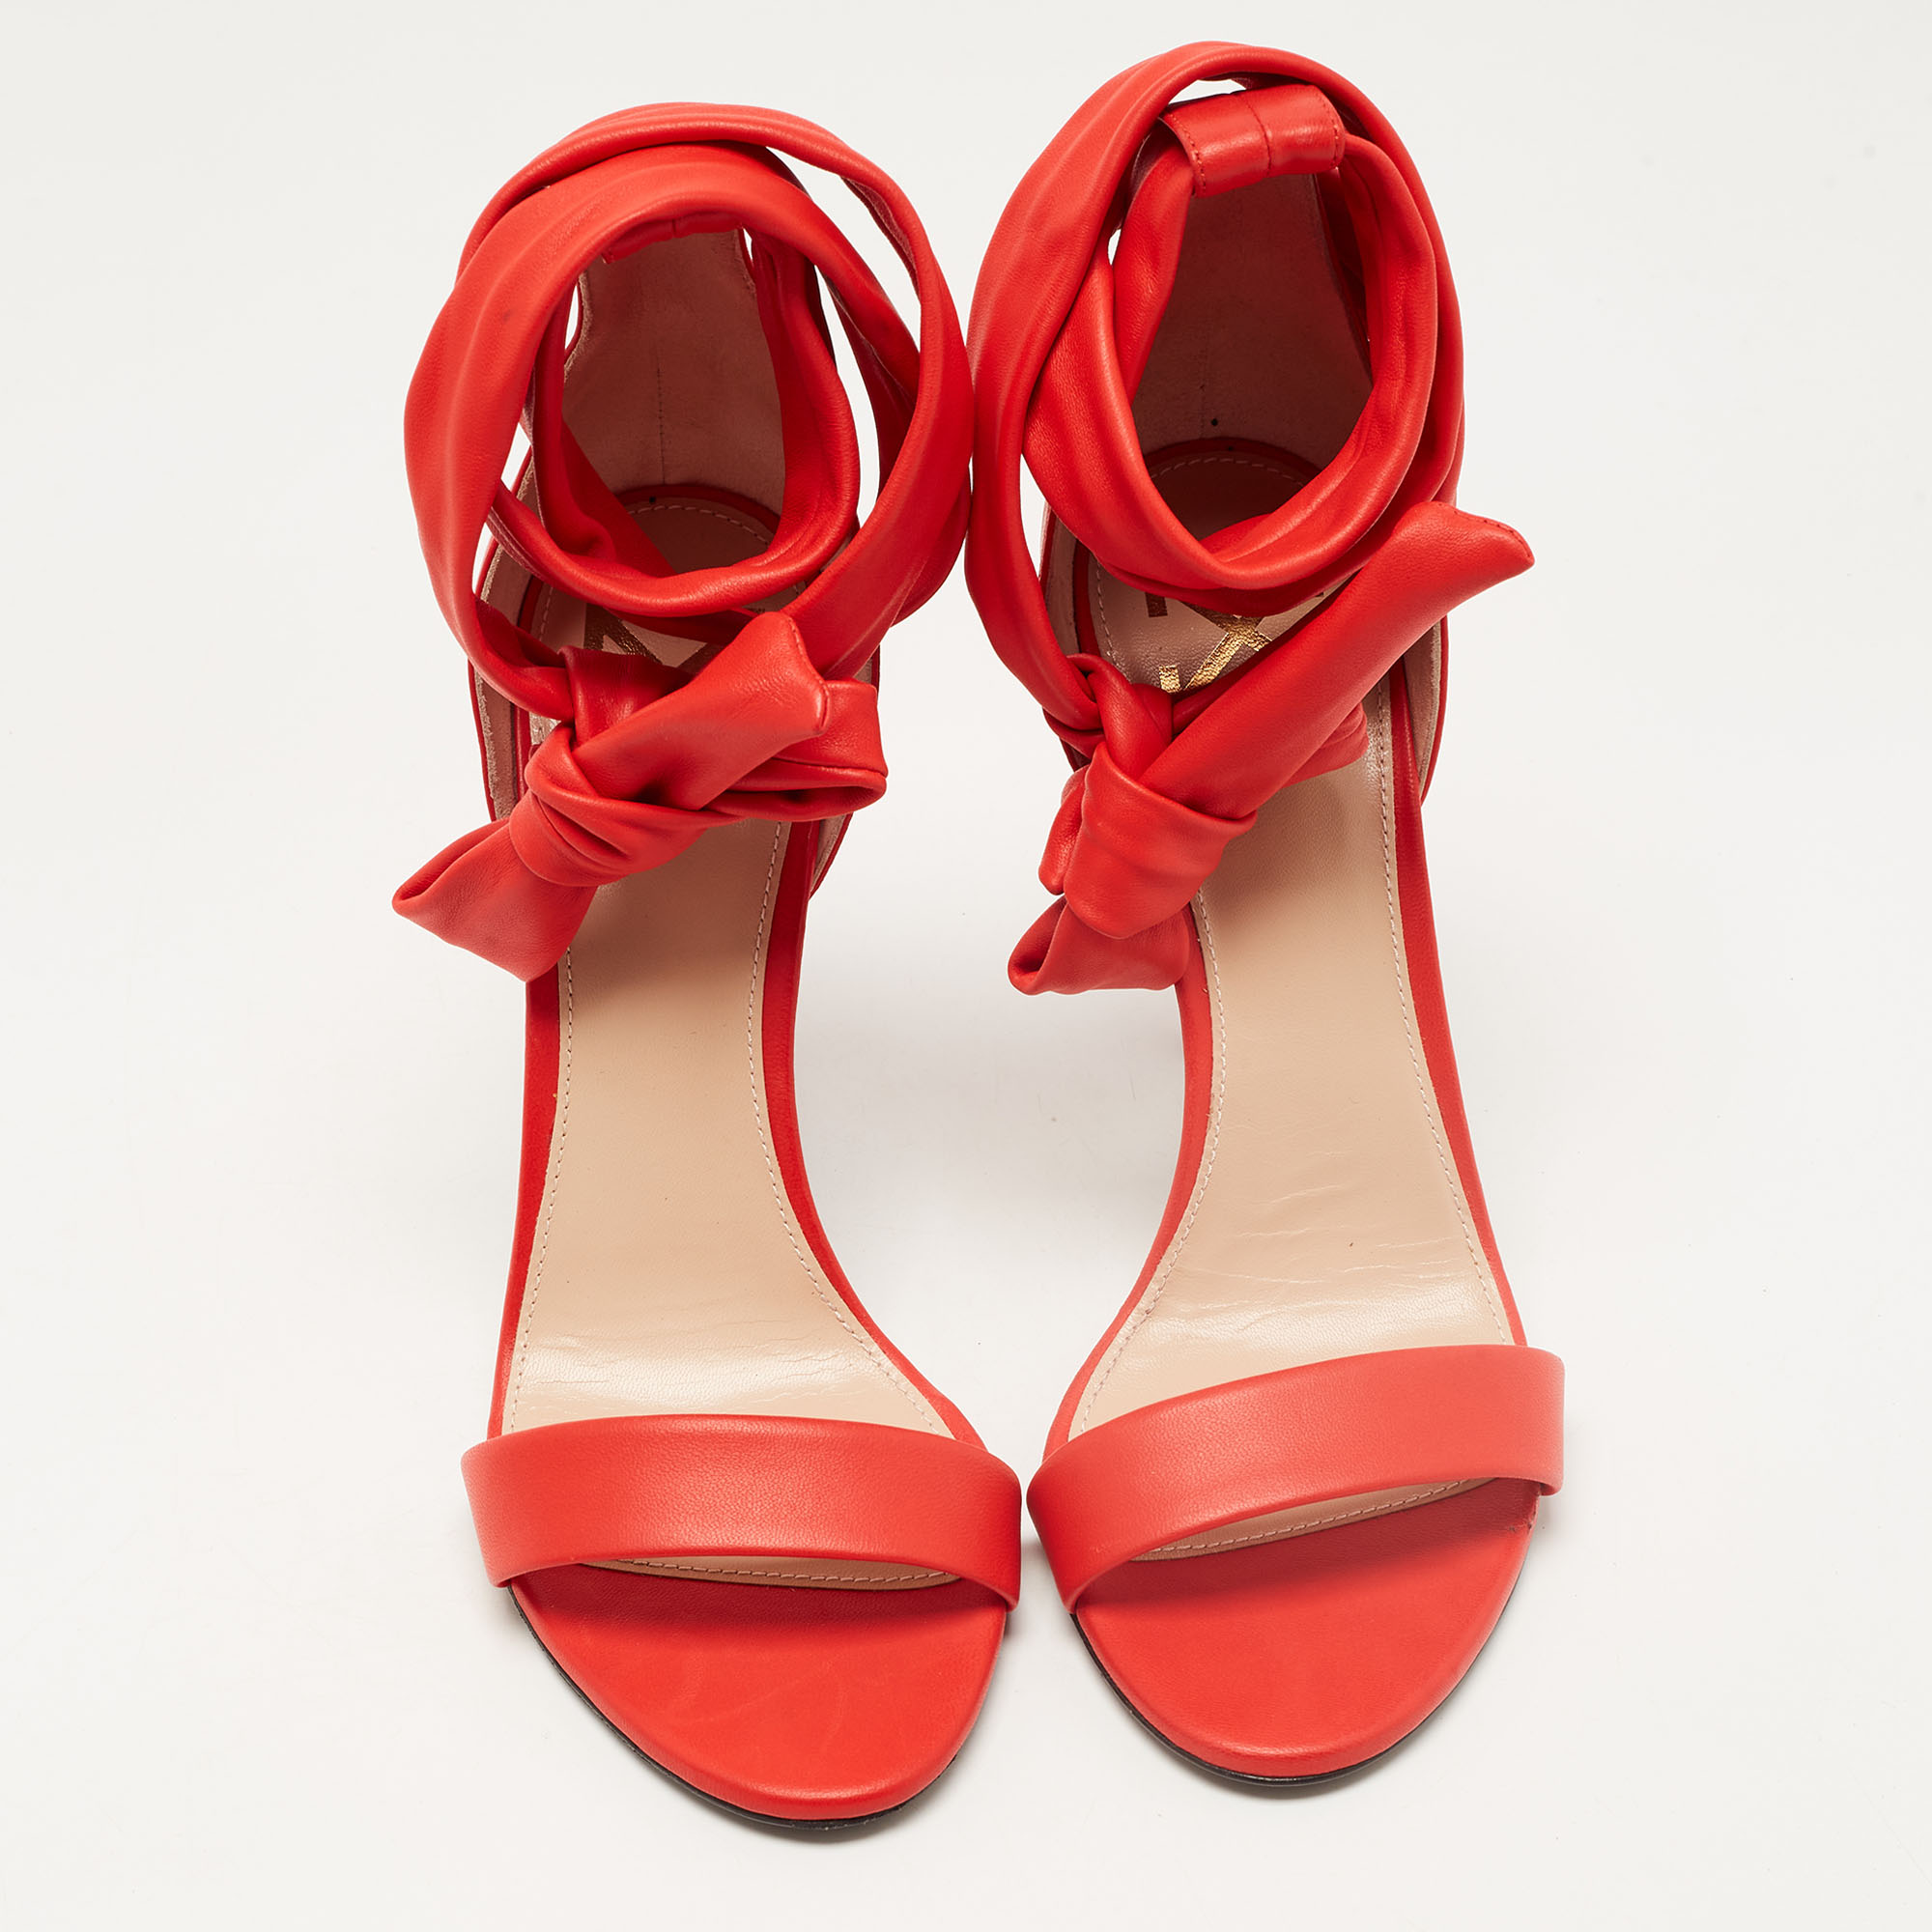 Off-White Red Leather Bow Ankle Tie Sandals Size 39